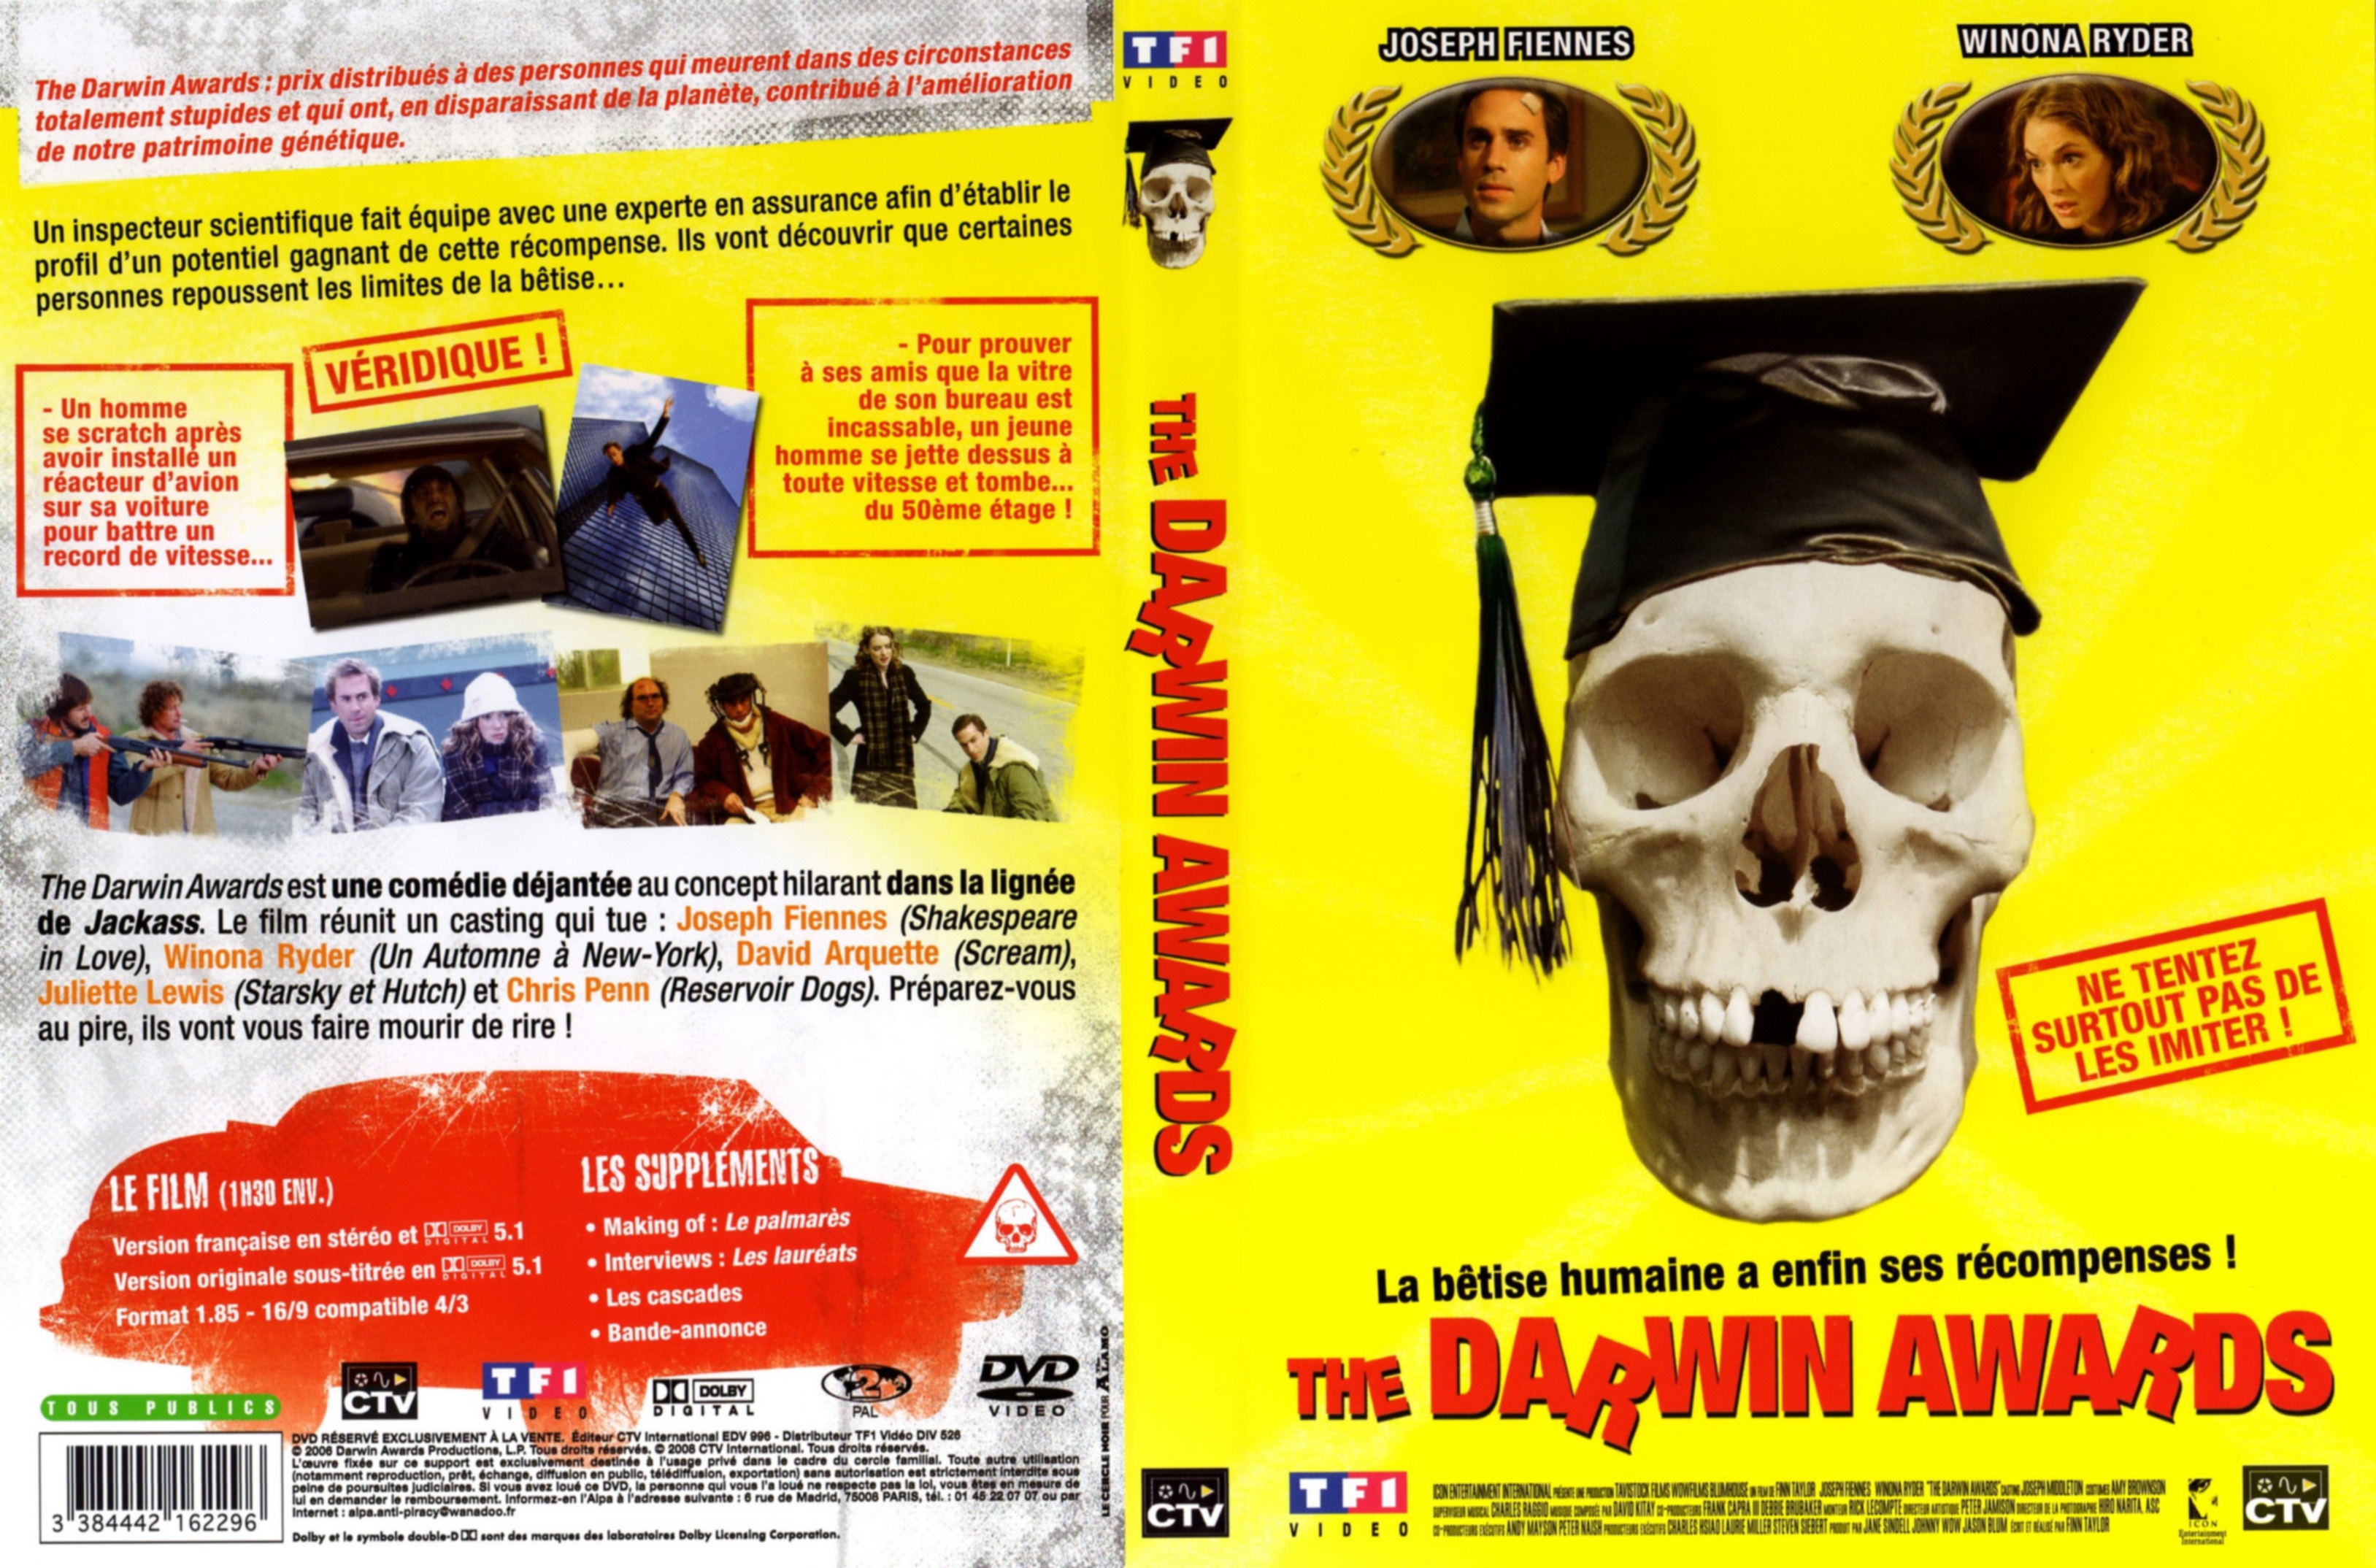 Jaquette DVD The darwin awards